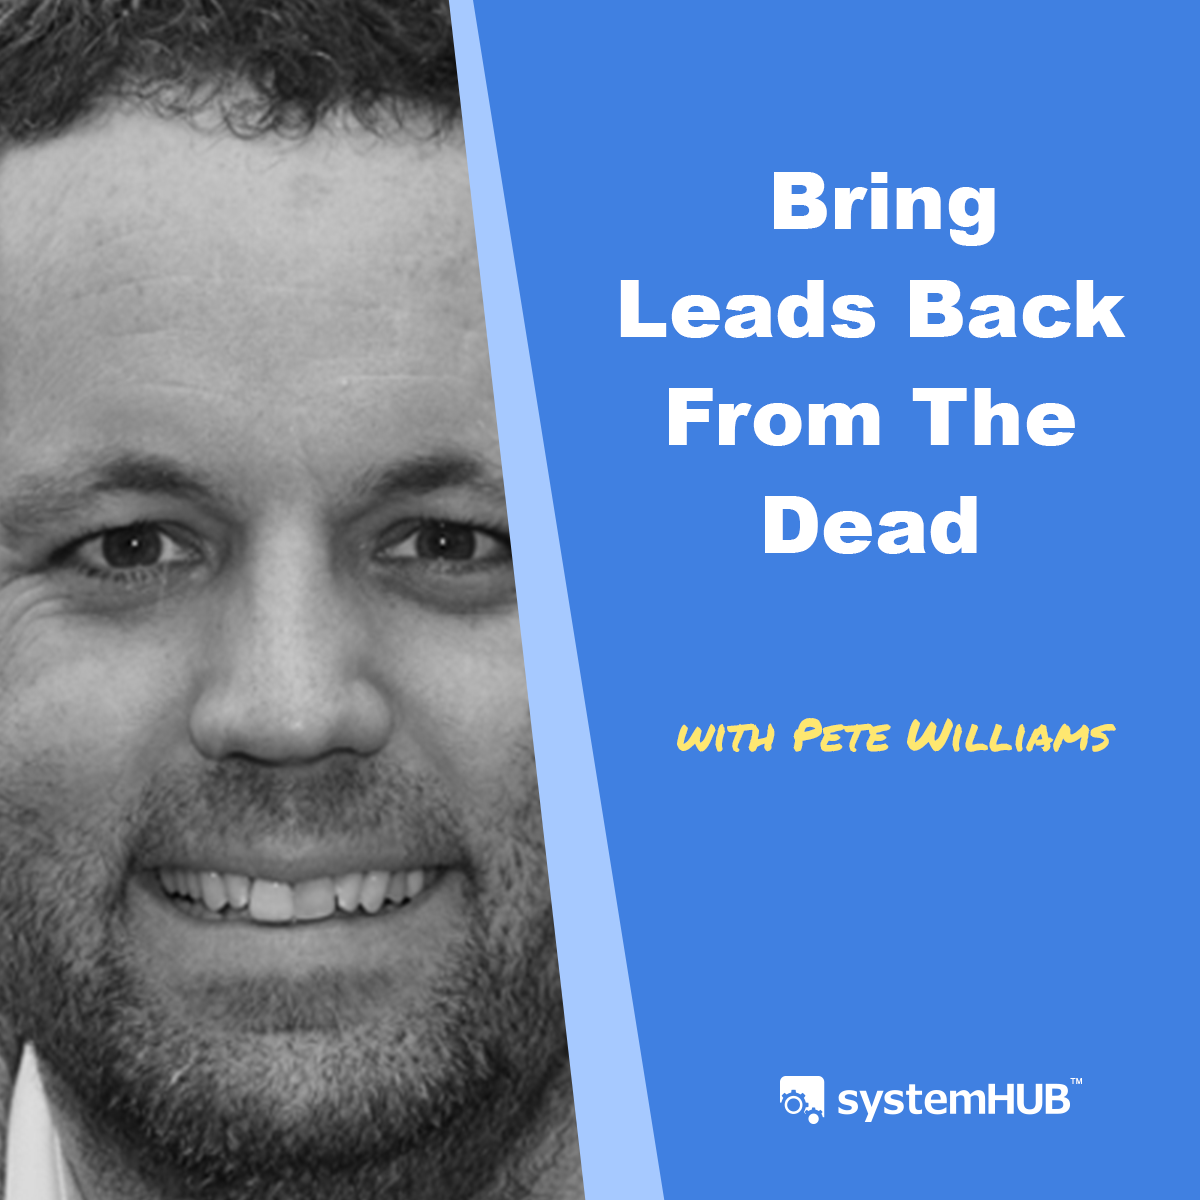 Bringing Leads Back from the Dead with Pete Williams